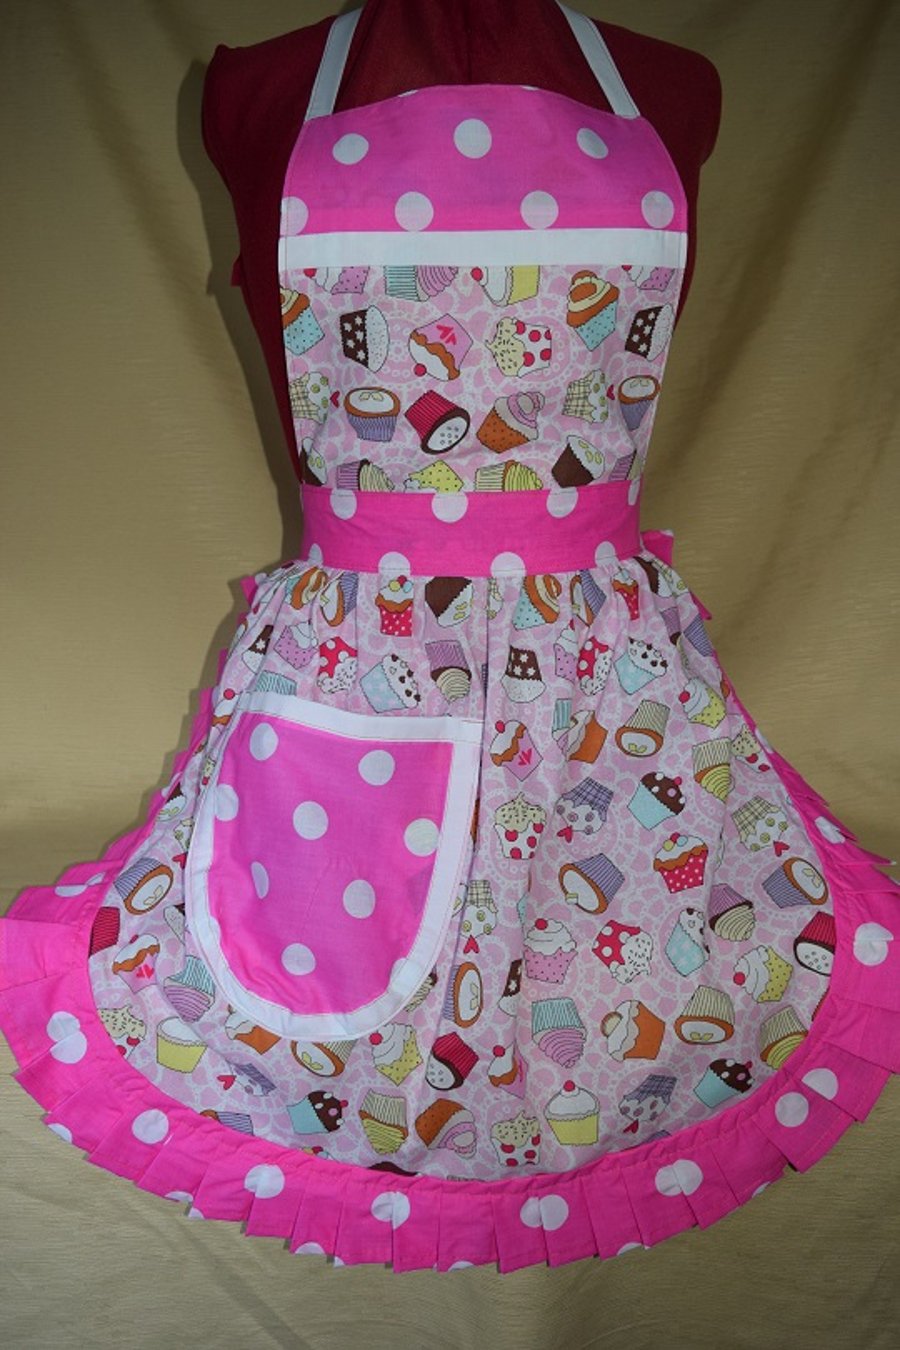 Vintage 50s Style Full Apron Pinny - Bright Pink Cupcake